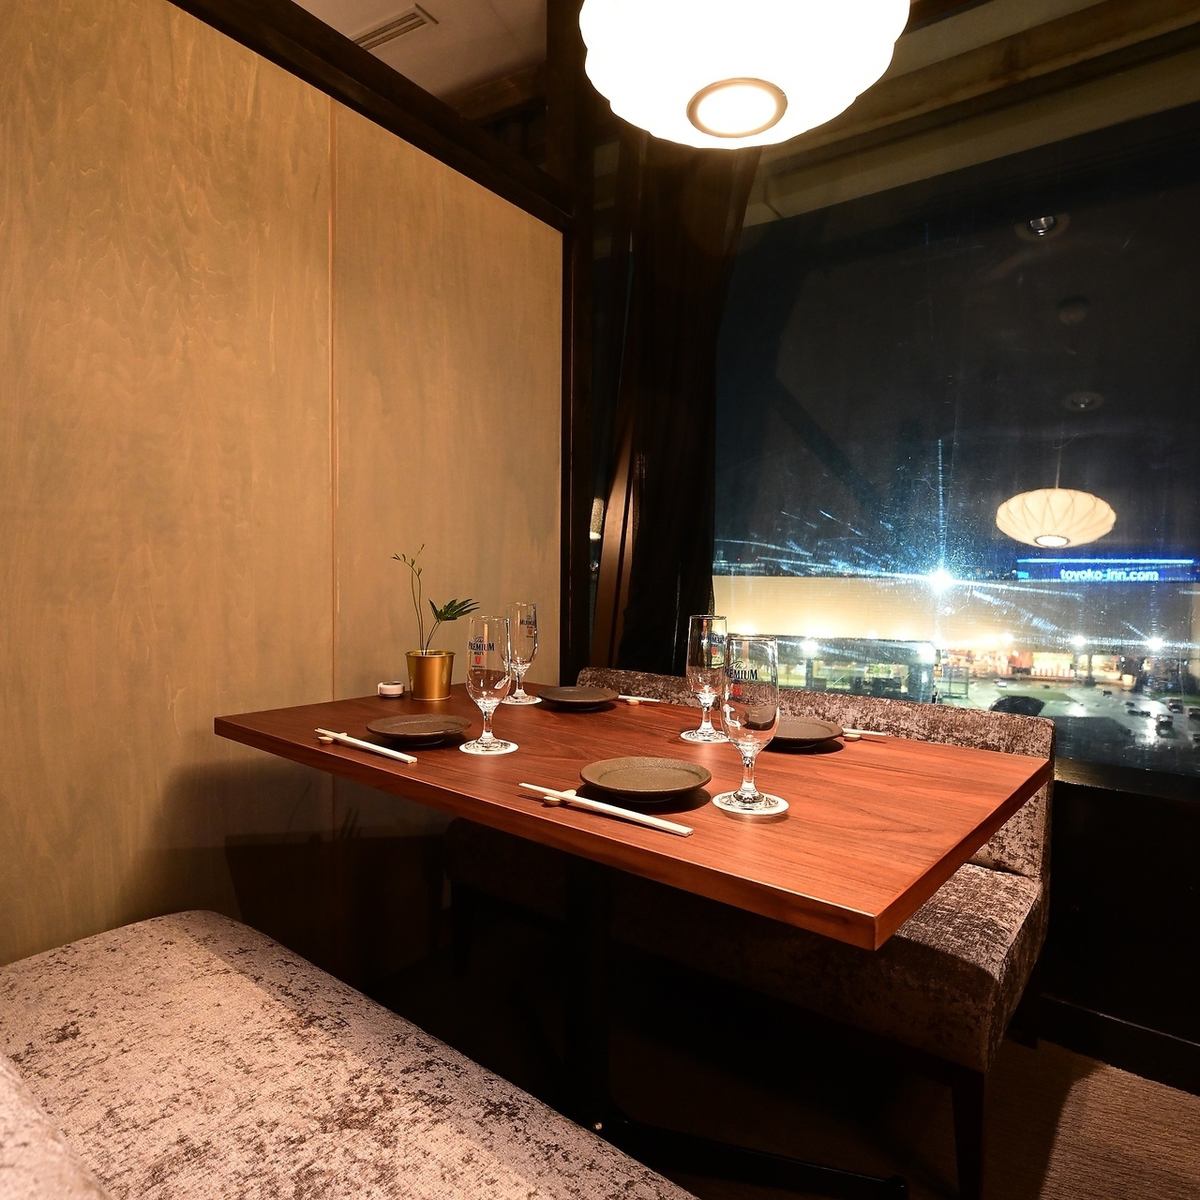 ◇ Completely private room ◇ Overlooking the night view of Toyota ♪ Relax elegantly in a stylish space